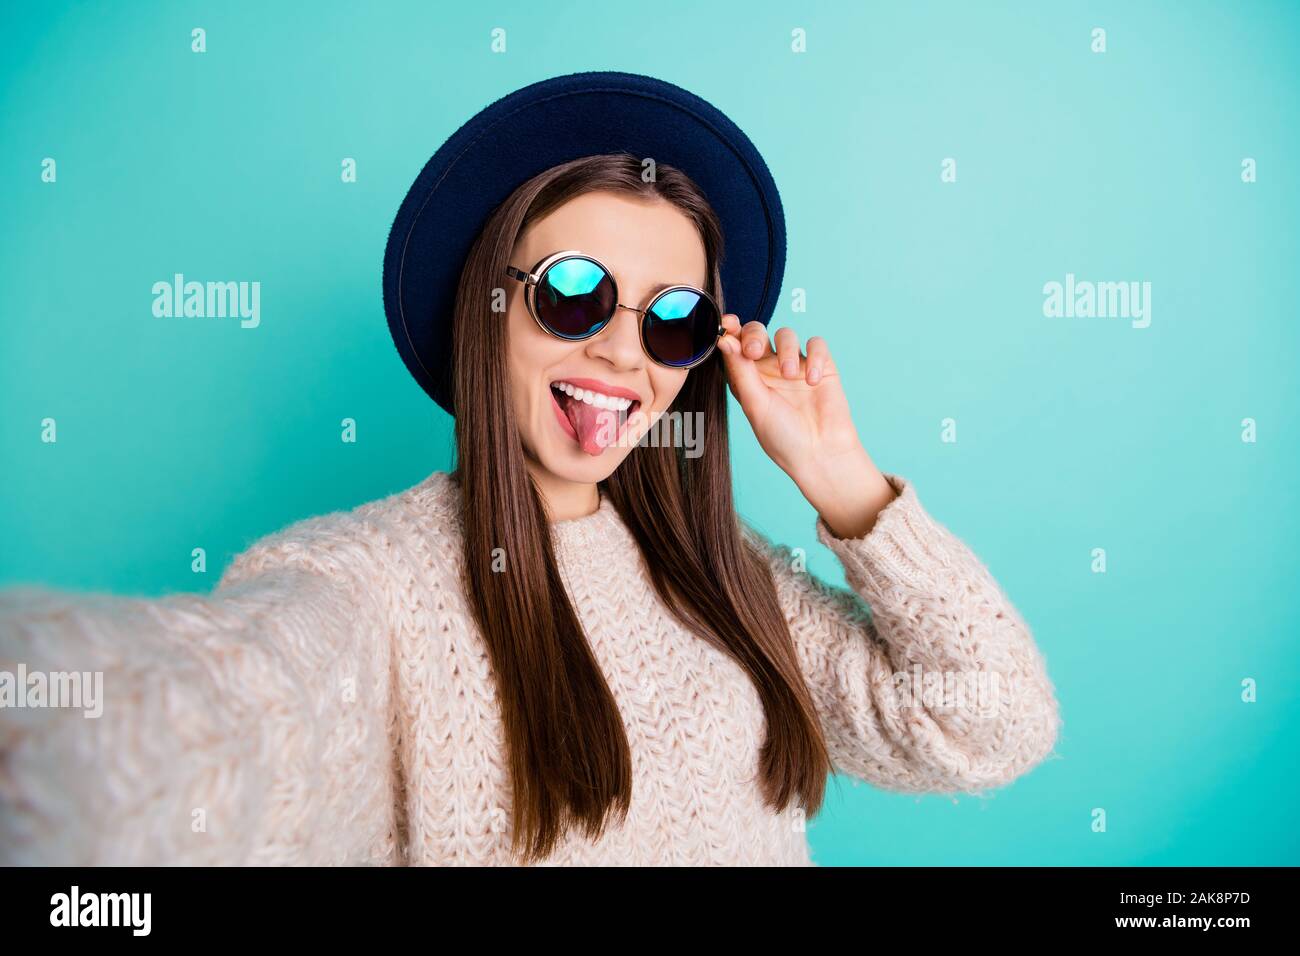 Close up photo of cheerful retro blooger take selfie on her vacation grimace wear knitted sweater isolated over teal turquoise background Stock Photo